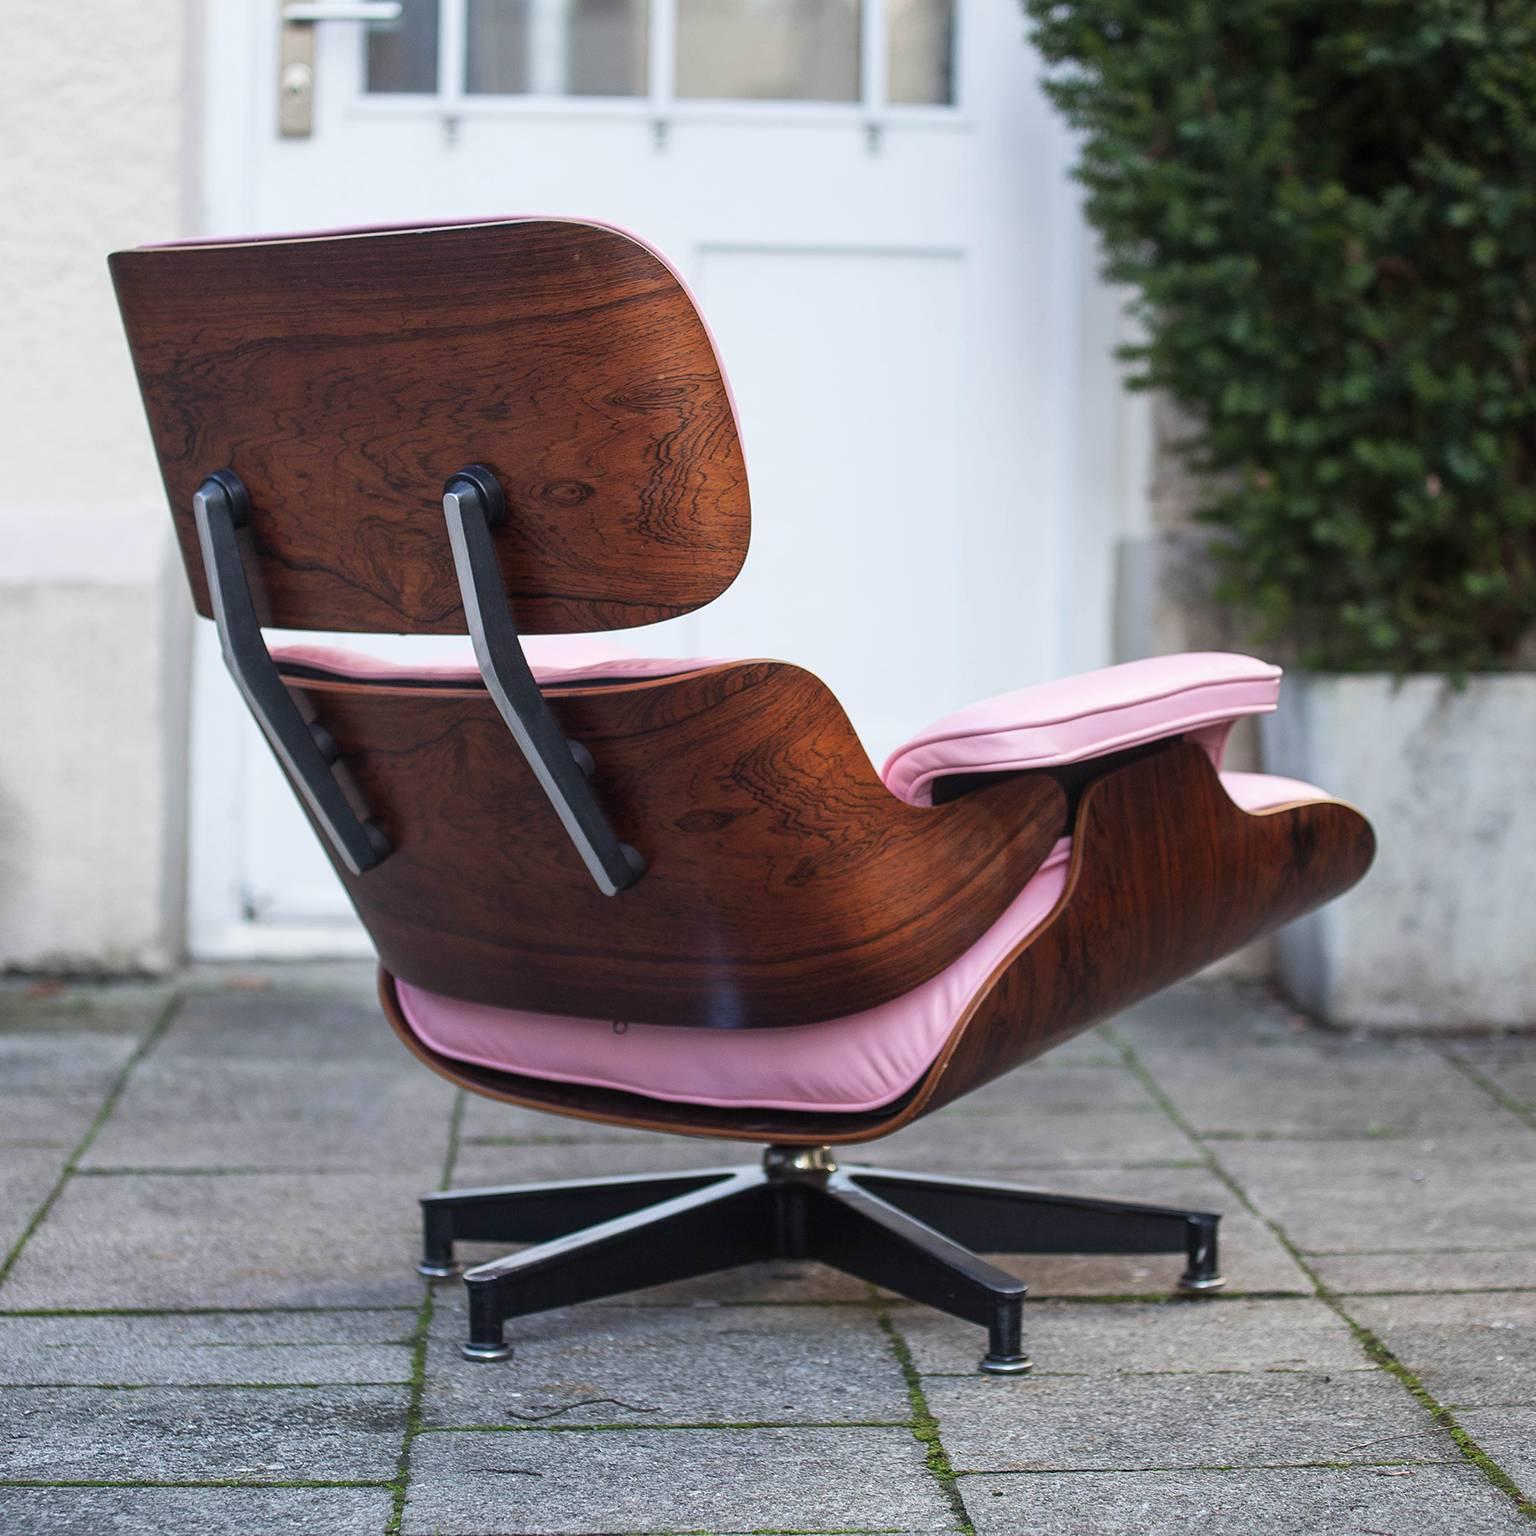 Iconic 670 lounge chair with ottoman by Charles and Ray Eames for Herman Miller. This chair is in pink new leather with a lightly grained rosewood veneer. Condition is excellent.